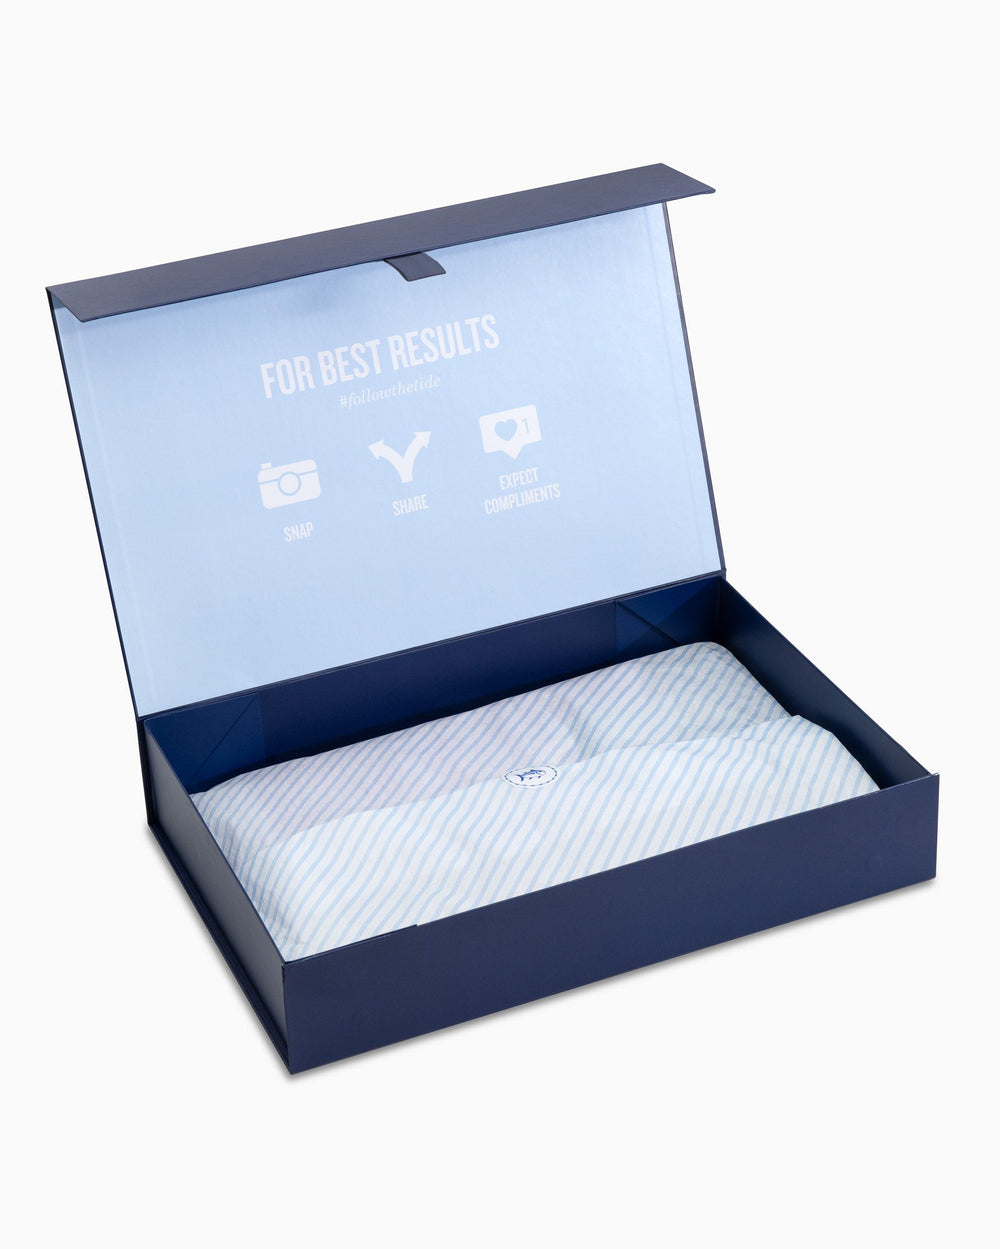 The large open view of the Southern Tide Graphic Gift Boxes One Size - Multi